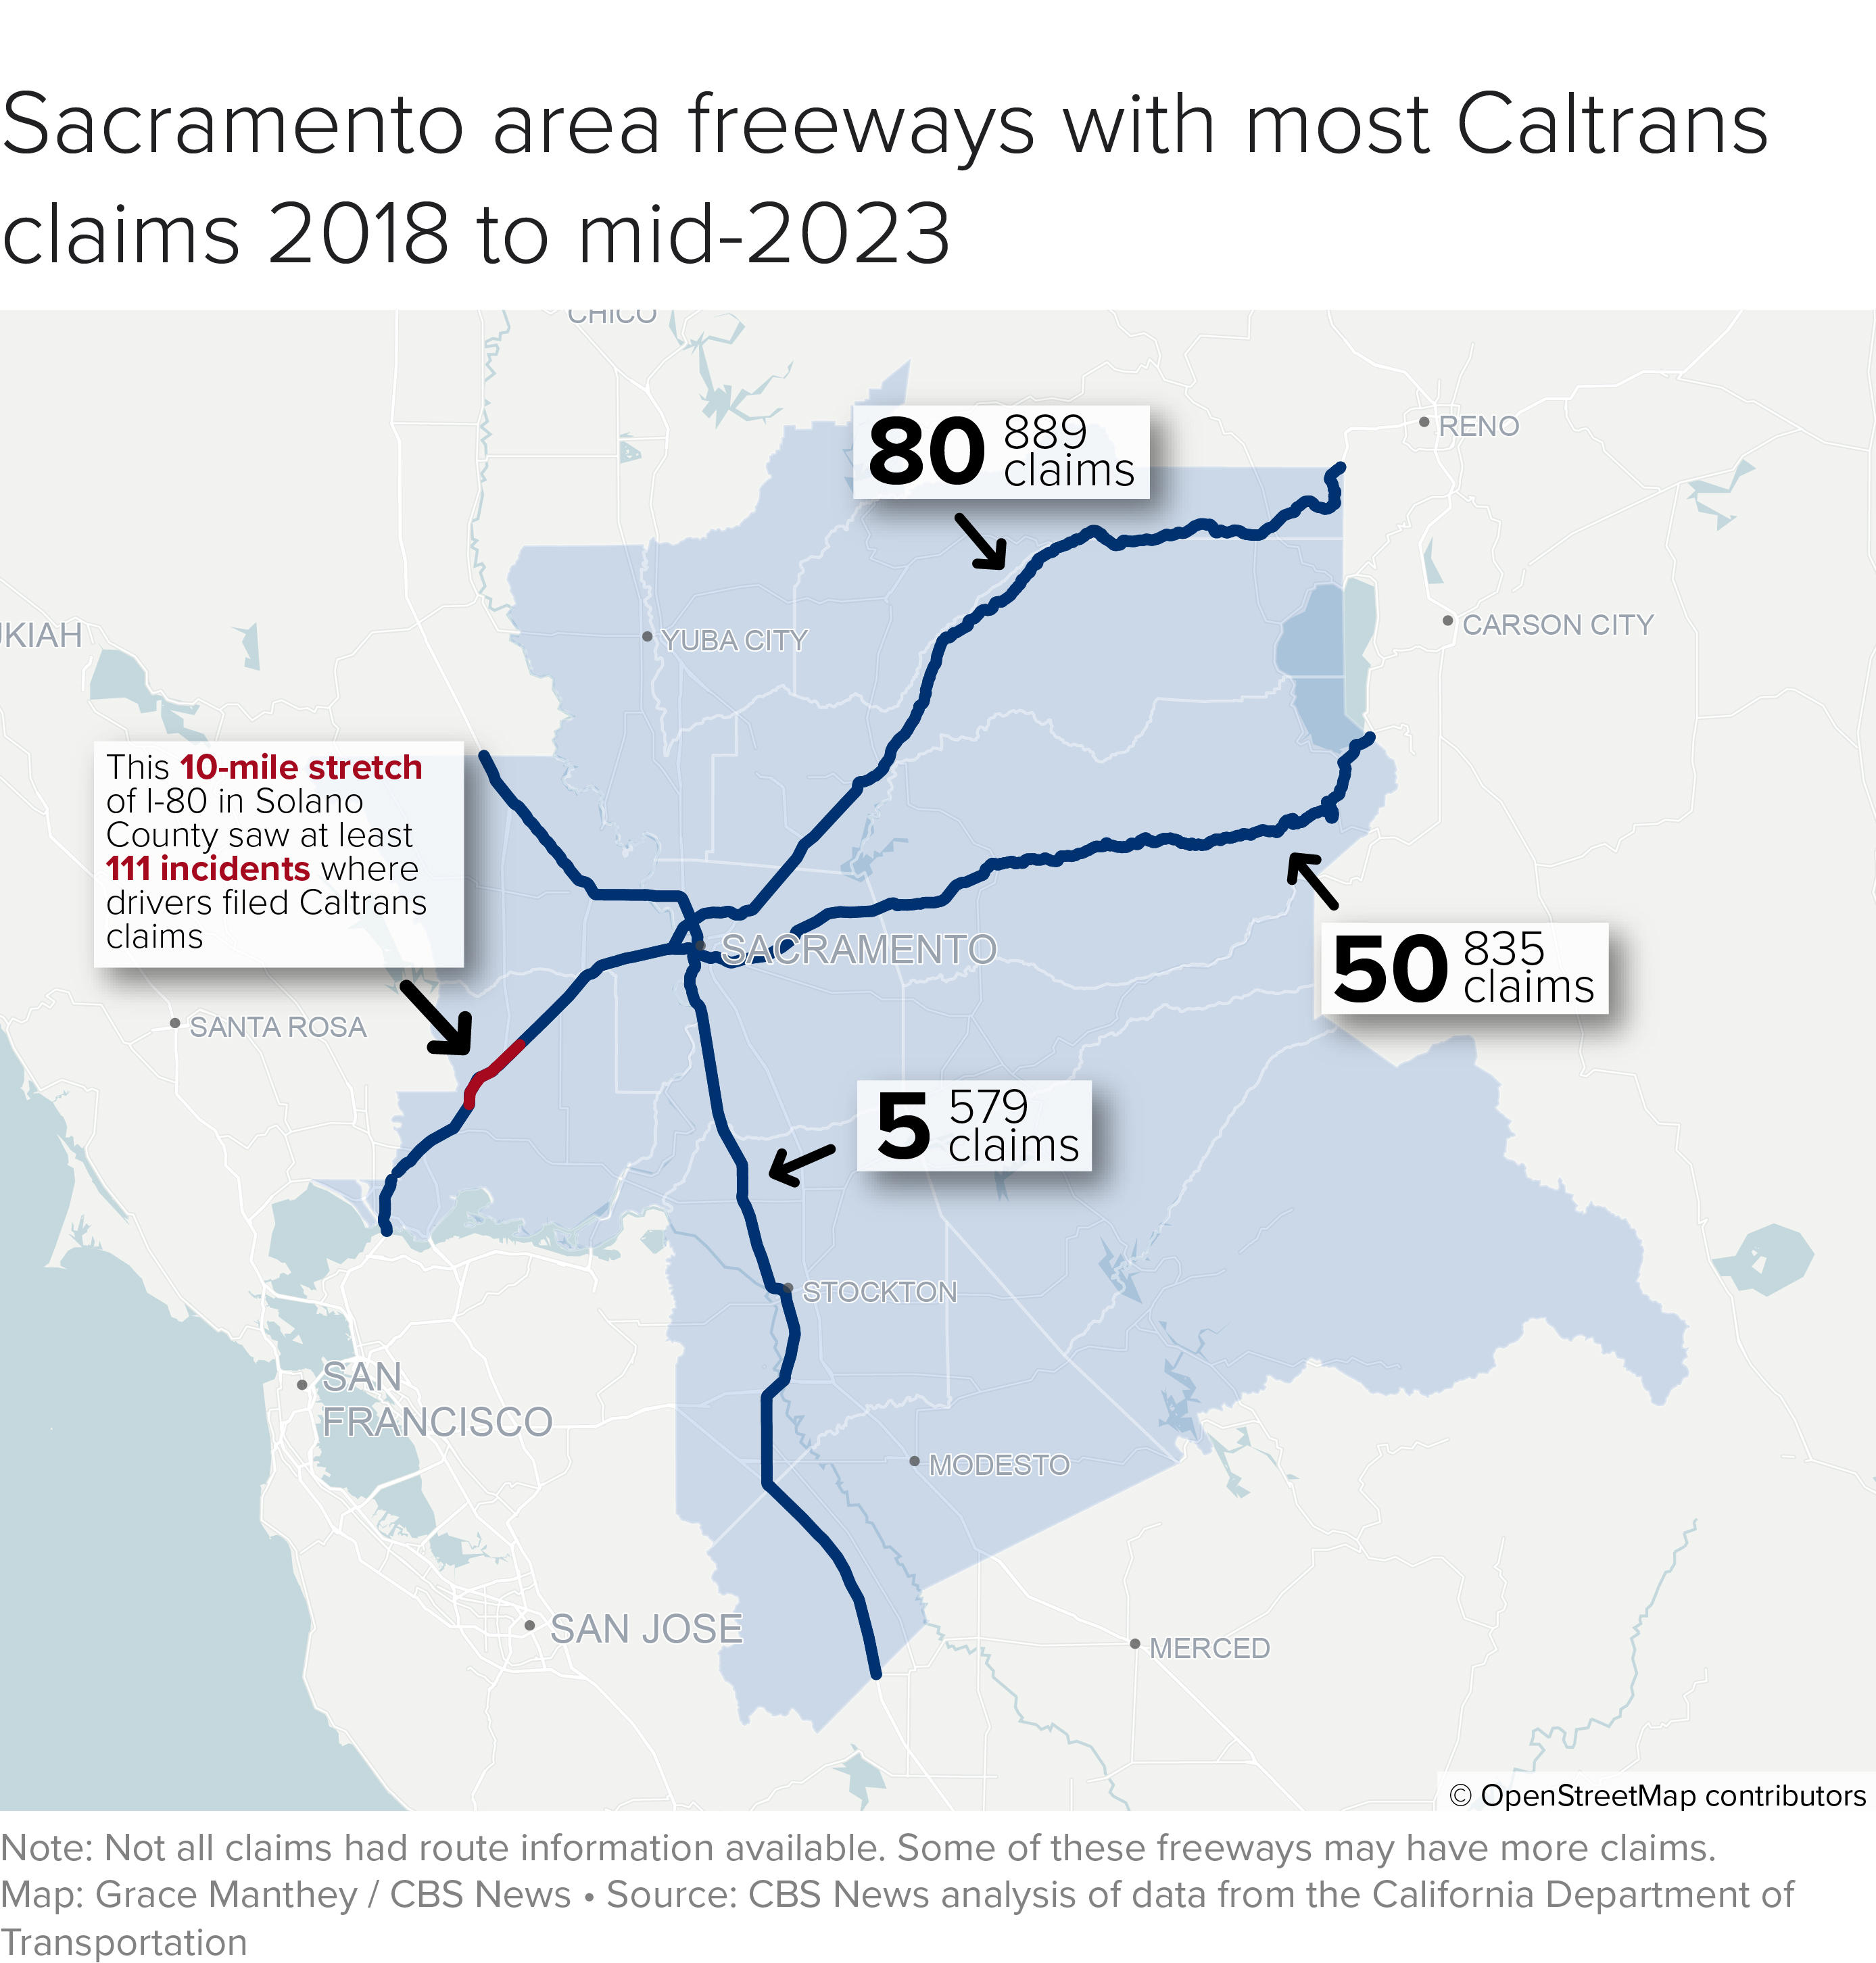 In the Sacramento region, the 80 tops the complaints list with nearly 900 claims between 2018 and mid-2023, followed by the 50 Freeway and the 5 Freeway. 